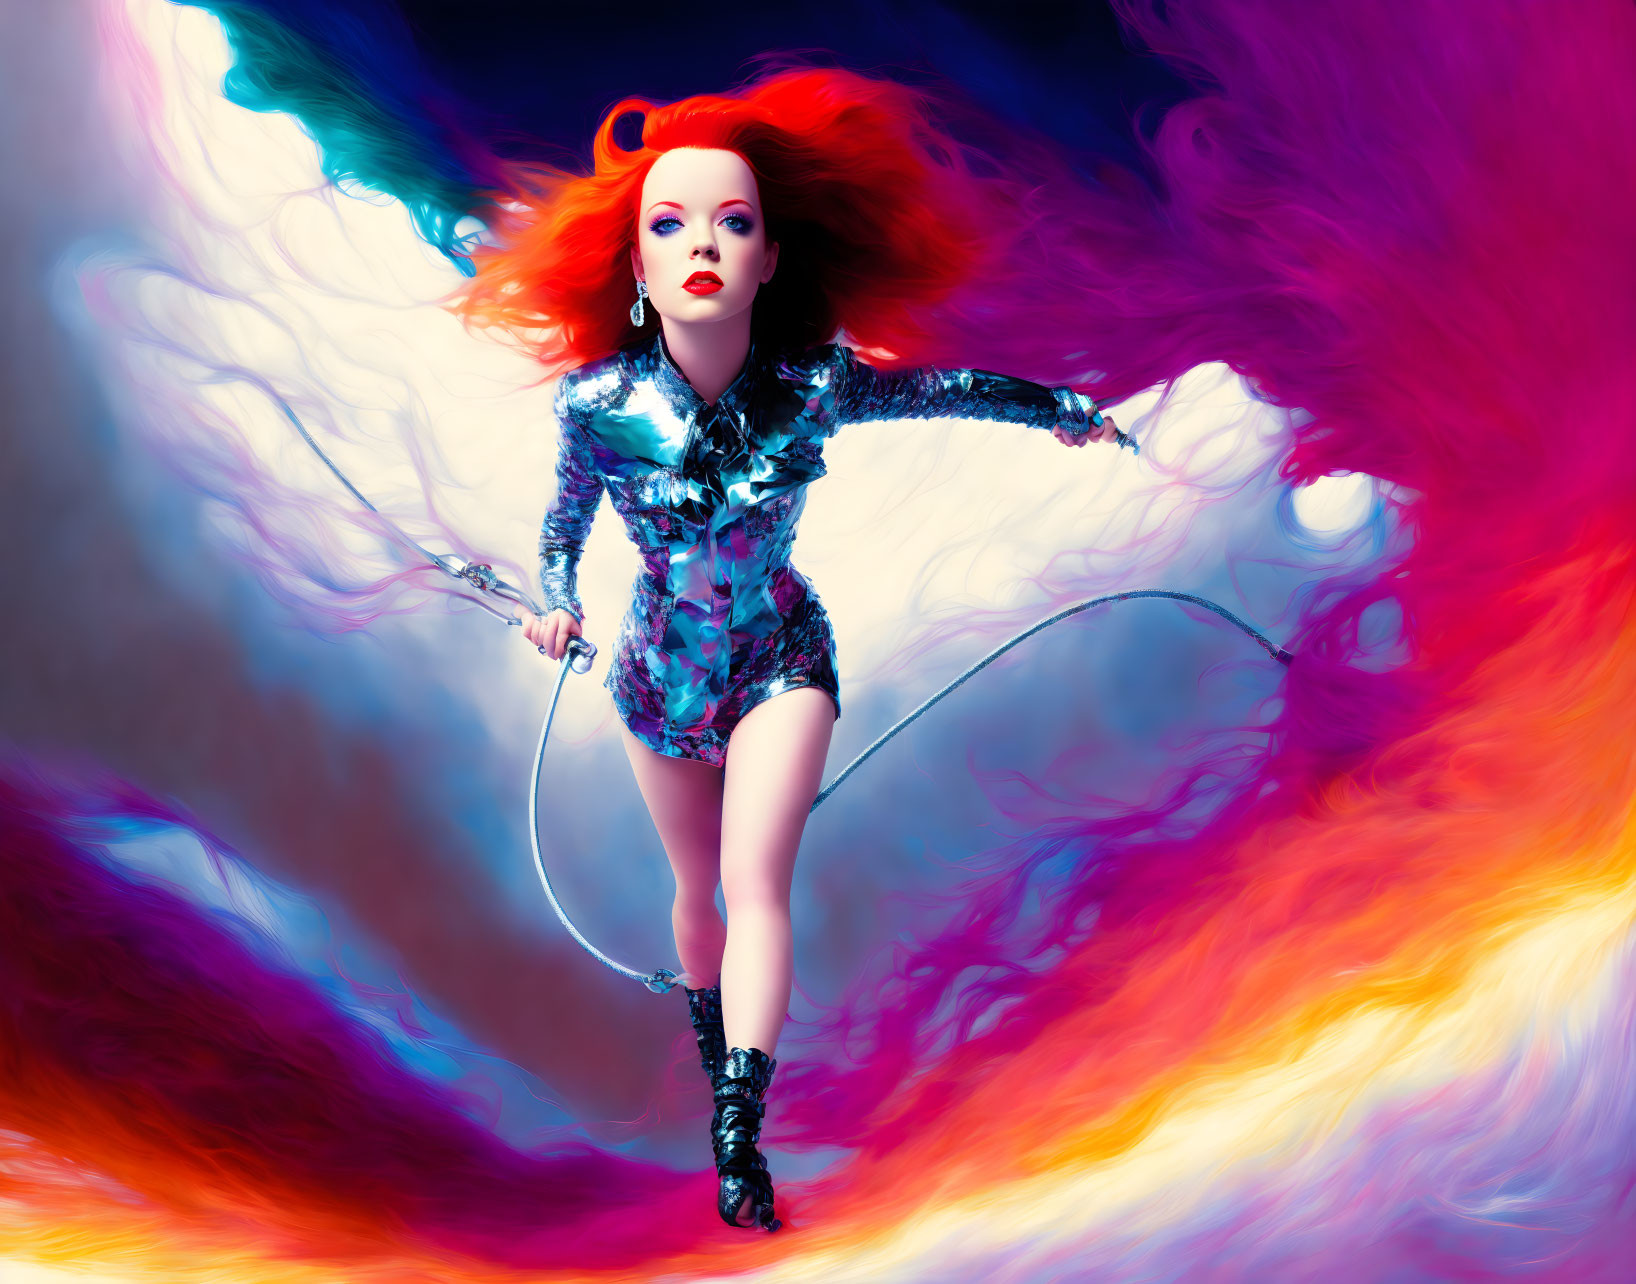 Vibrant Red-Haired Woman Jumping Rope in Colorful Swirl